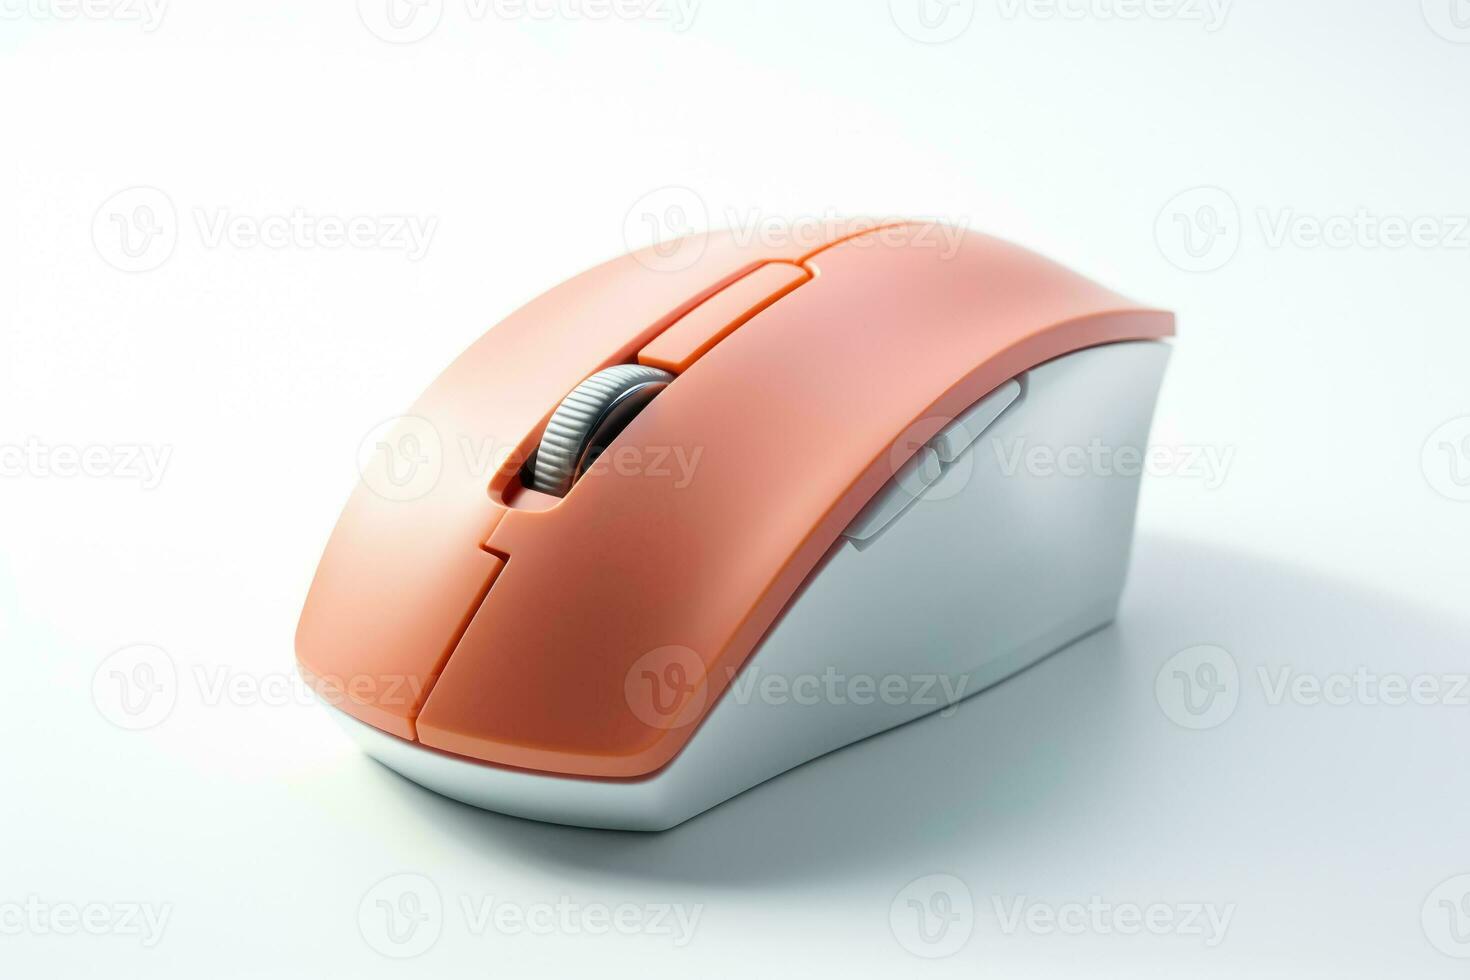 Mouse click icon with Cyber Week text isolated on a white background photo